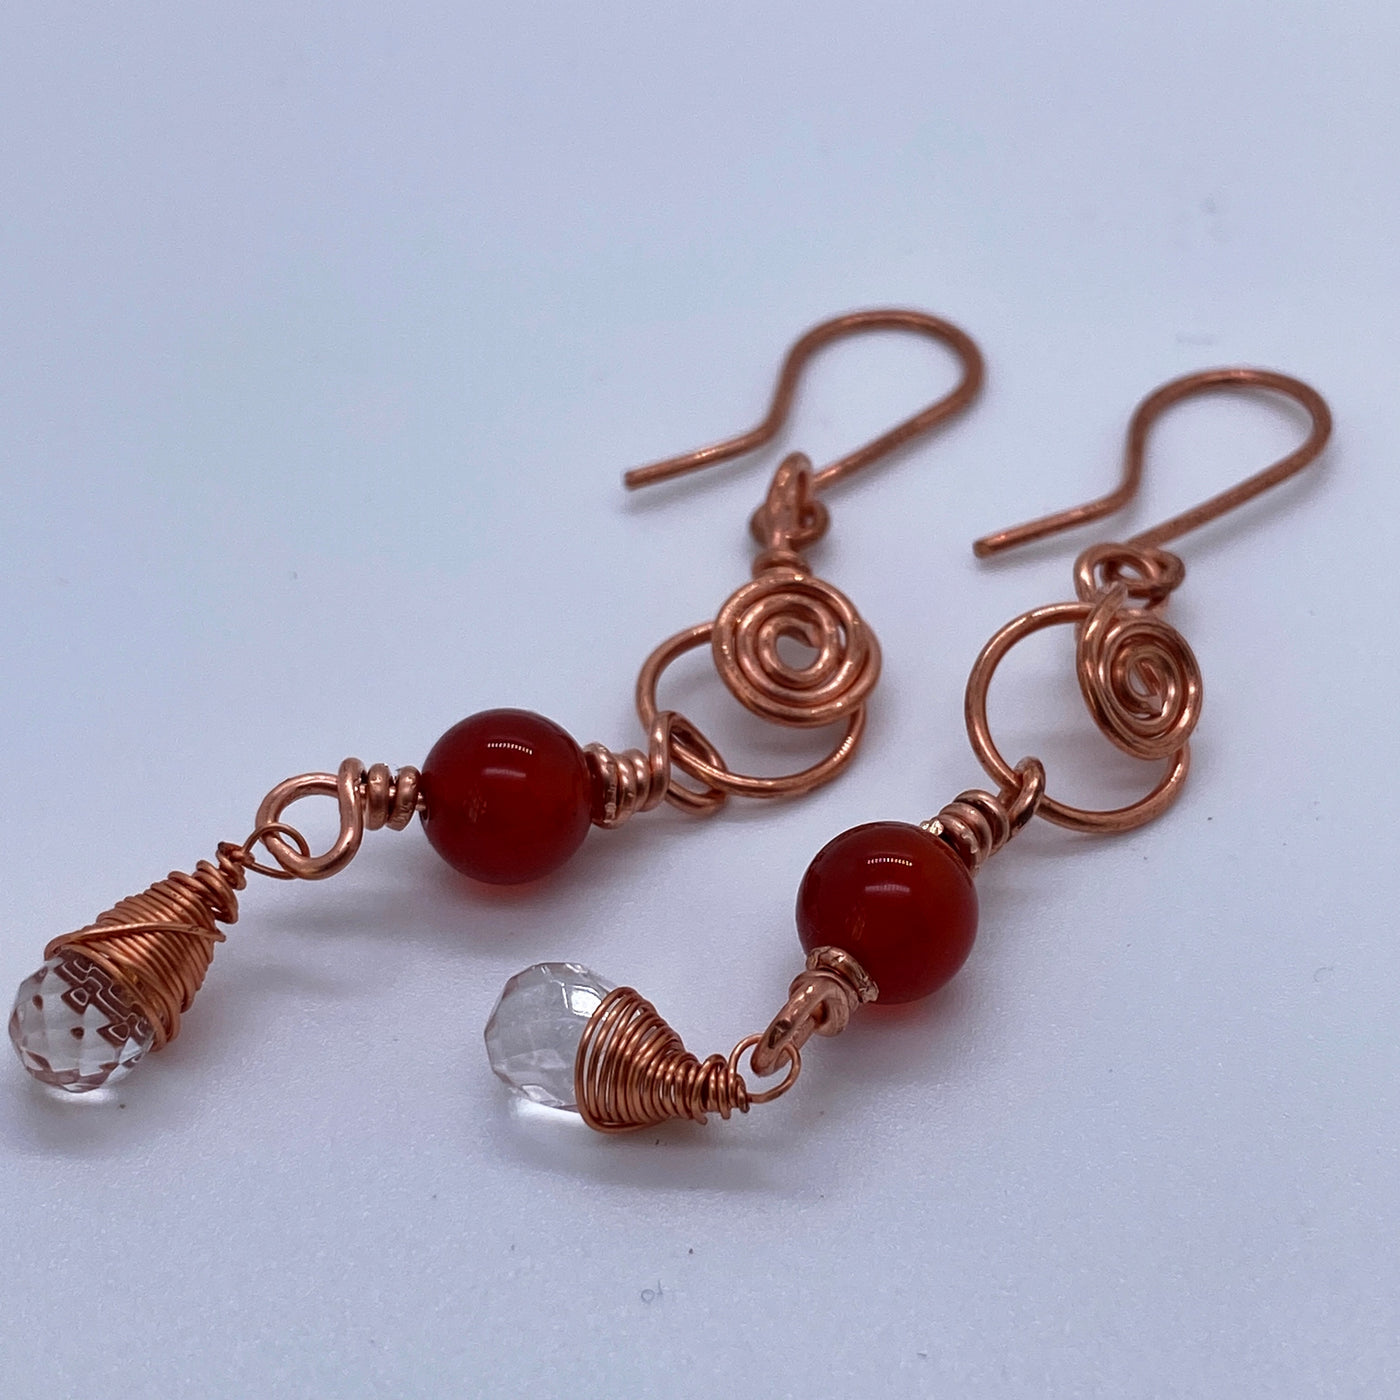 7 cm long earrings in wire and red agate with quartz briolette